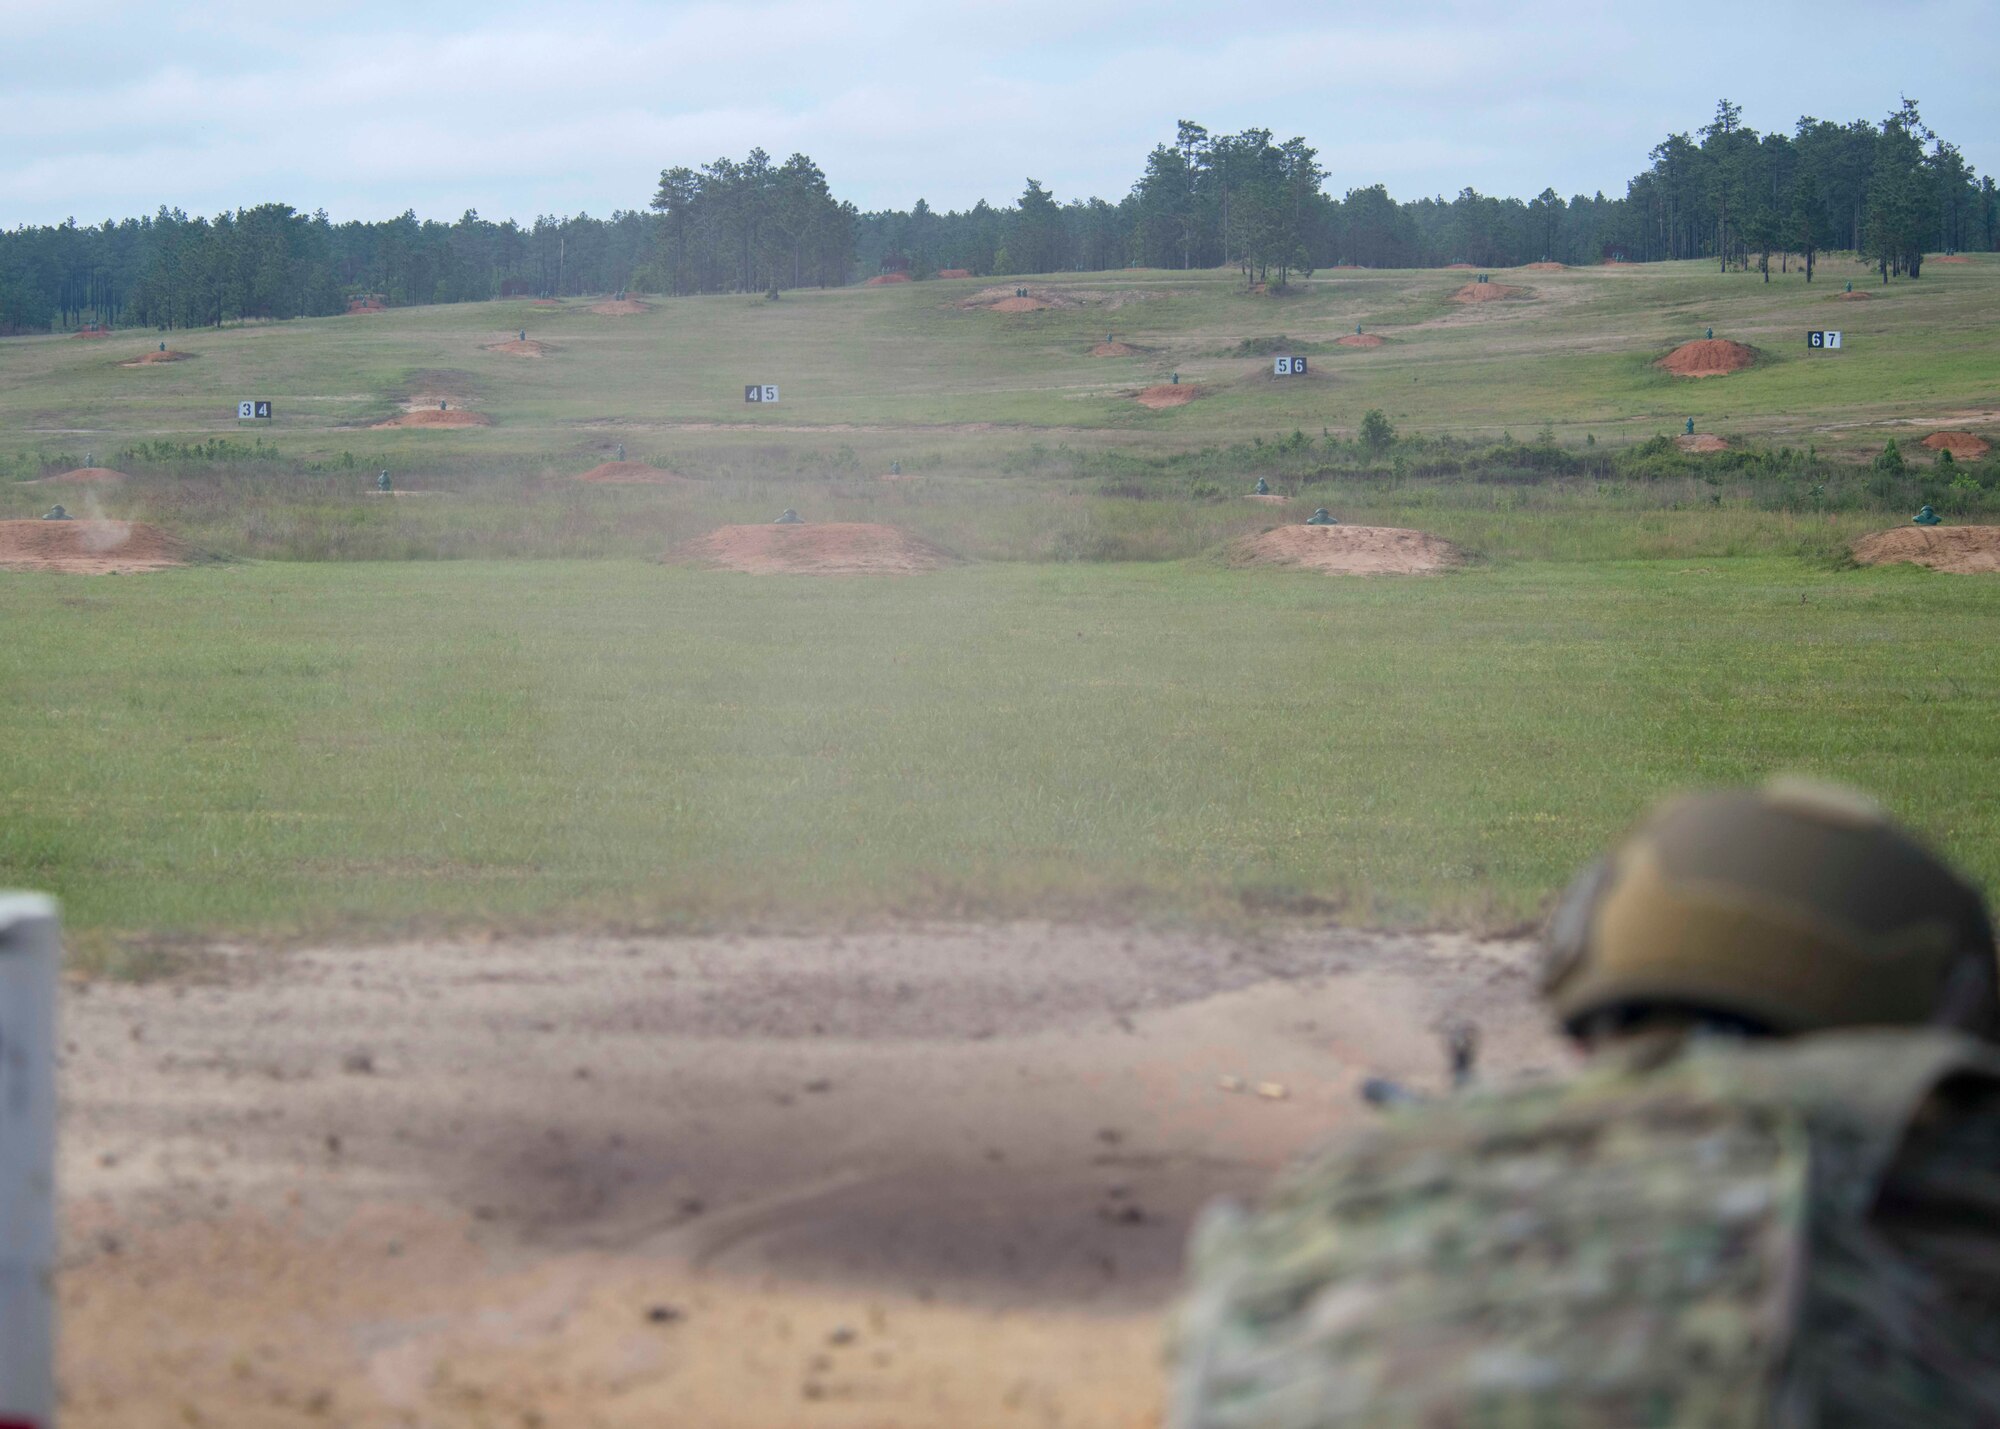 Senior Airman Kyle Runk, 4th Security Forces Squadron patrolman, fires an M249 light machine gun at a range on Fort Bragg, North Carolina, May 6, 2020. The machine gun full distance range had pop-up targets arranged at different distance and heights. (U.S. Air Force photo by Airman First Class Kimberly Barrera)